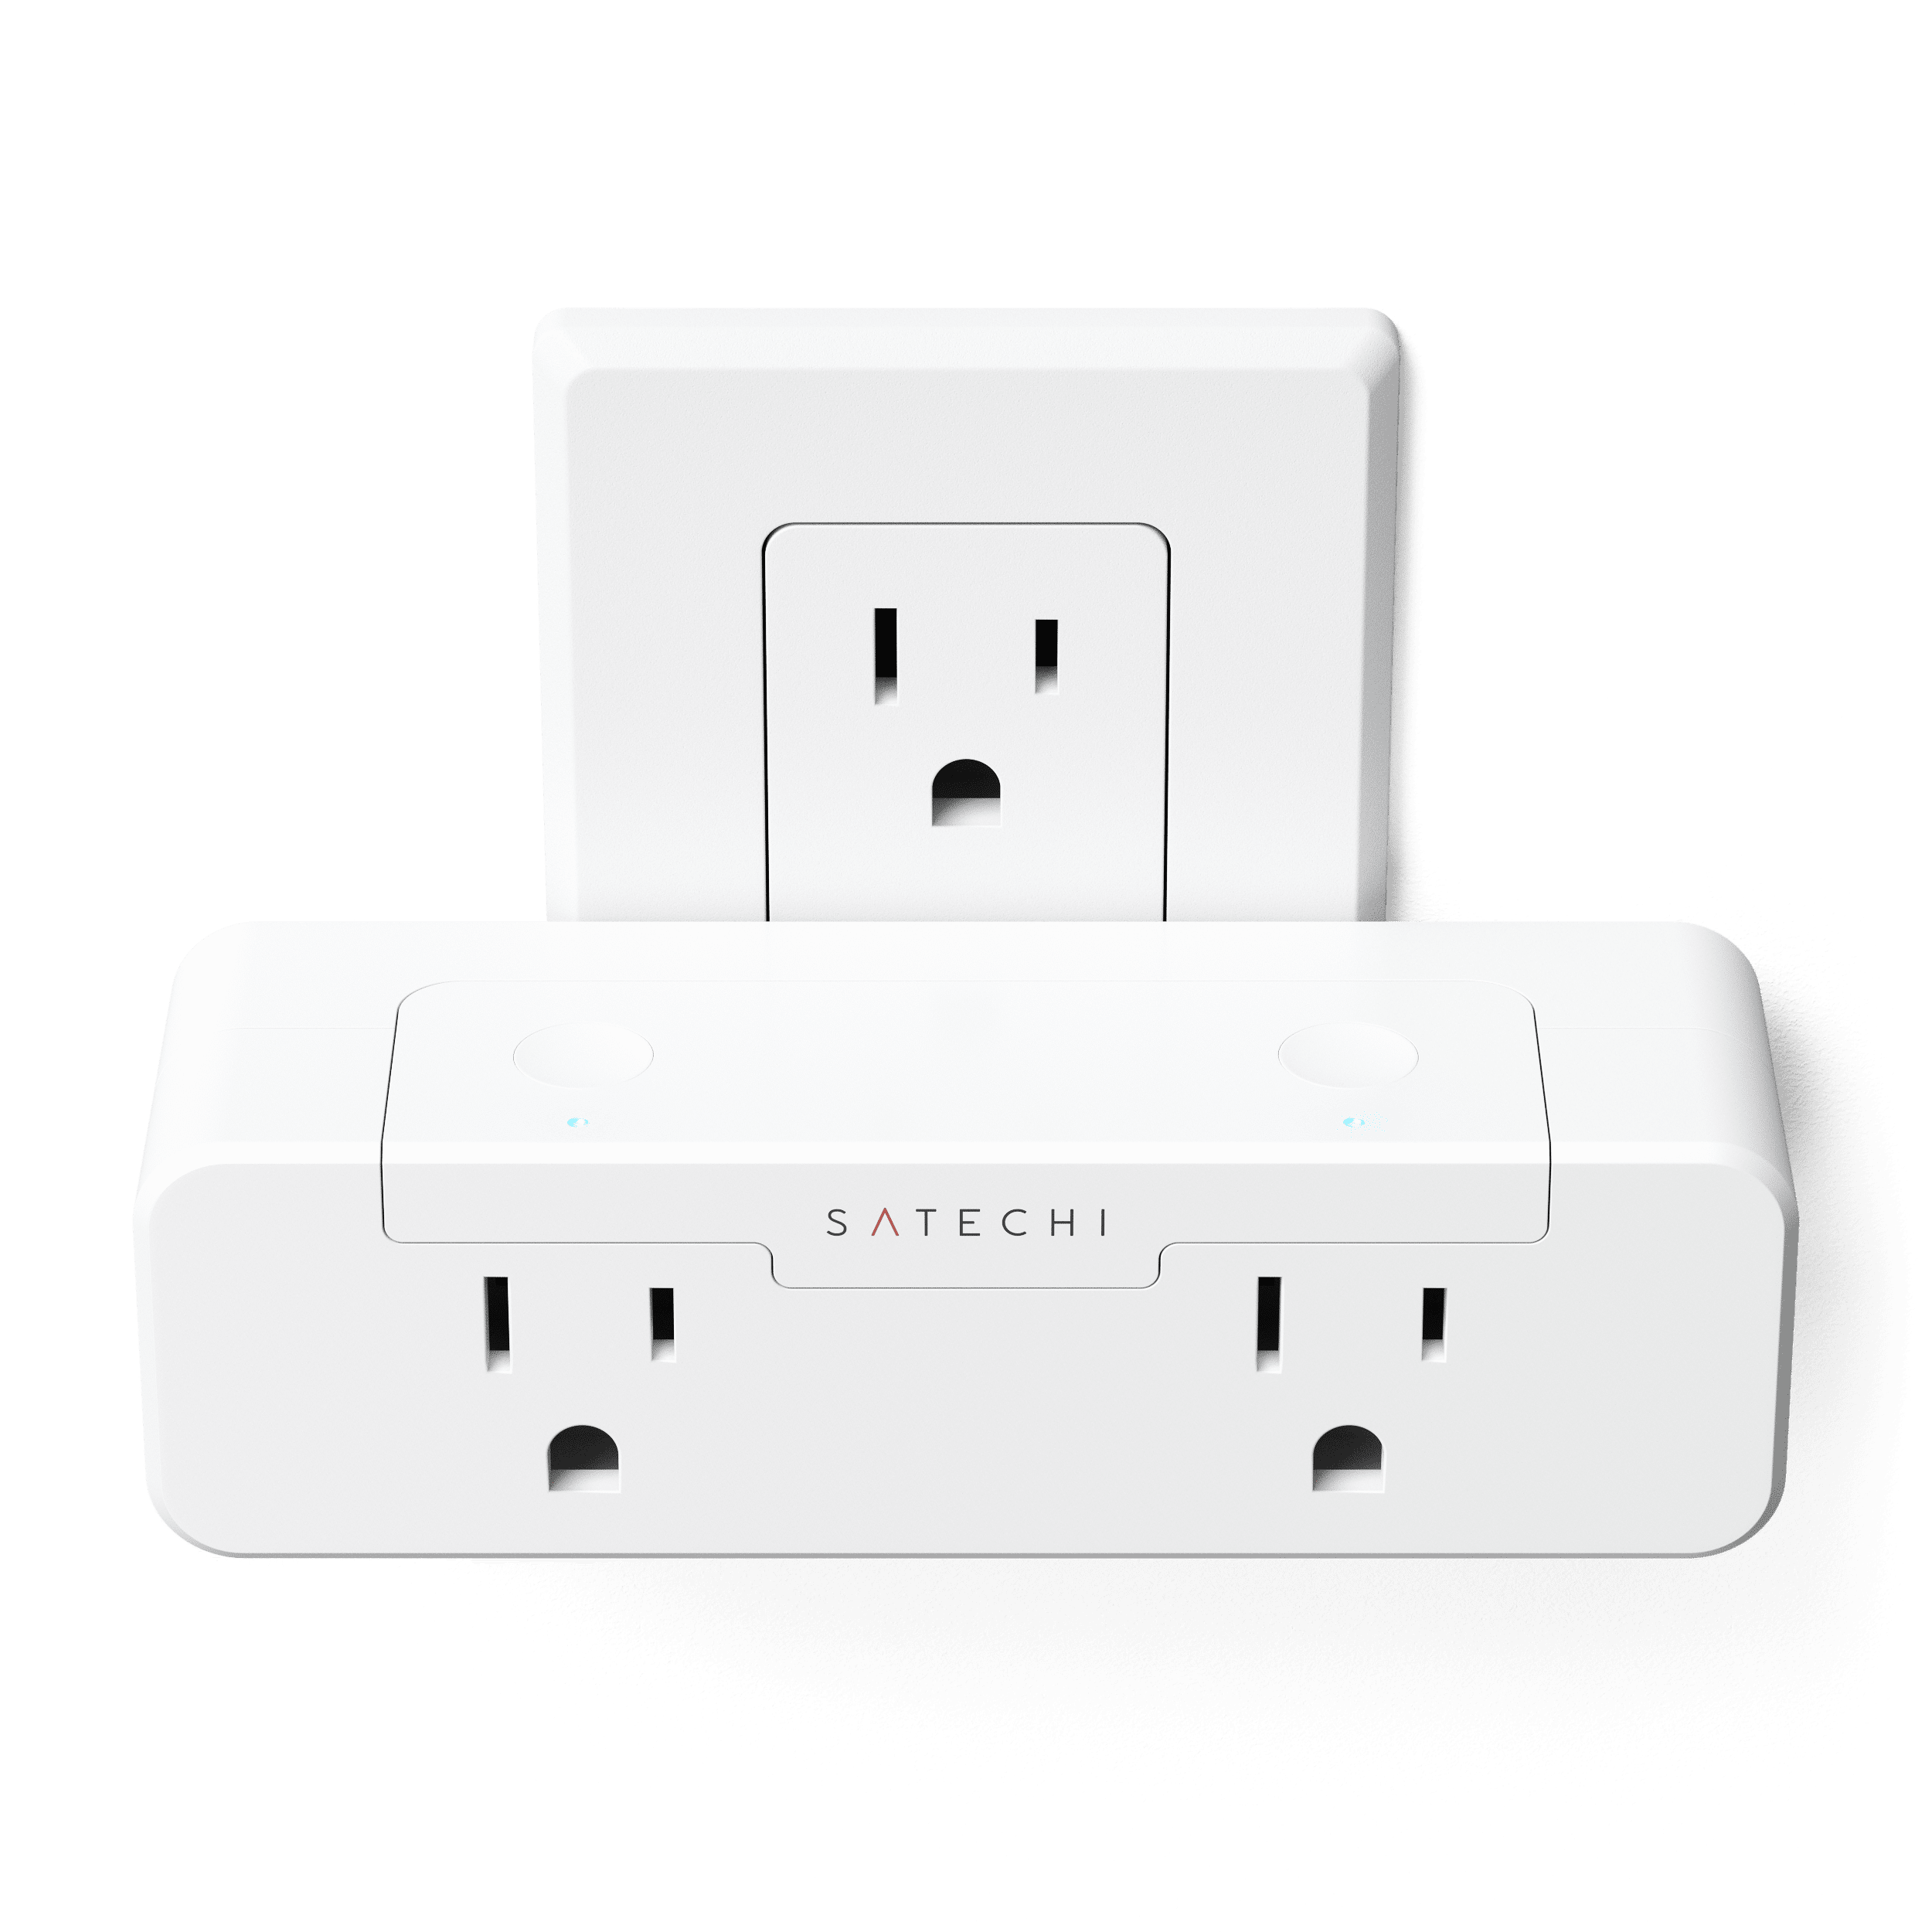 https://cdn.shopify.com/s/files/1/1520/4366/products/dual-smart-outlet-power-charging-smart-home-satechi-660299.png?v=1674968345